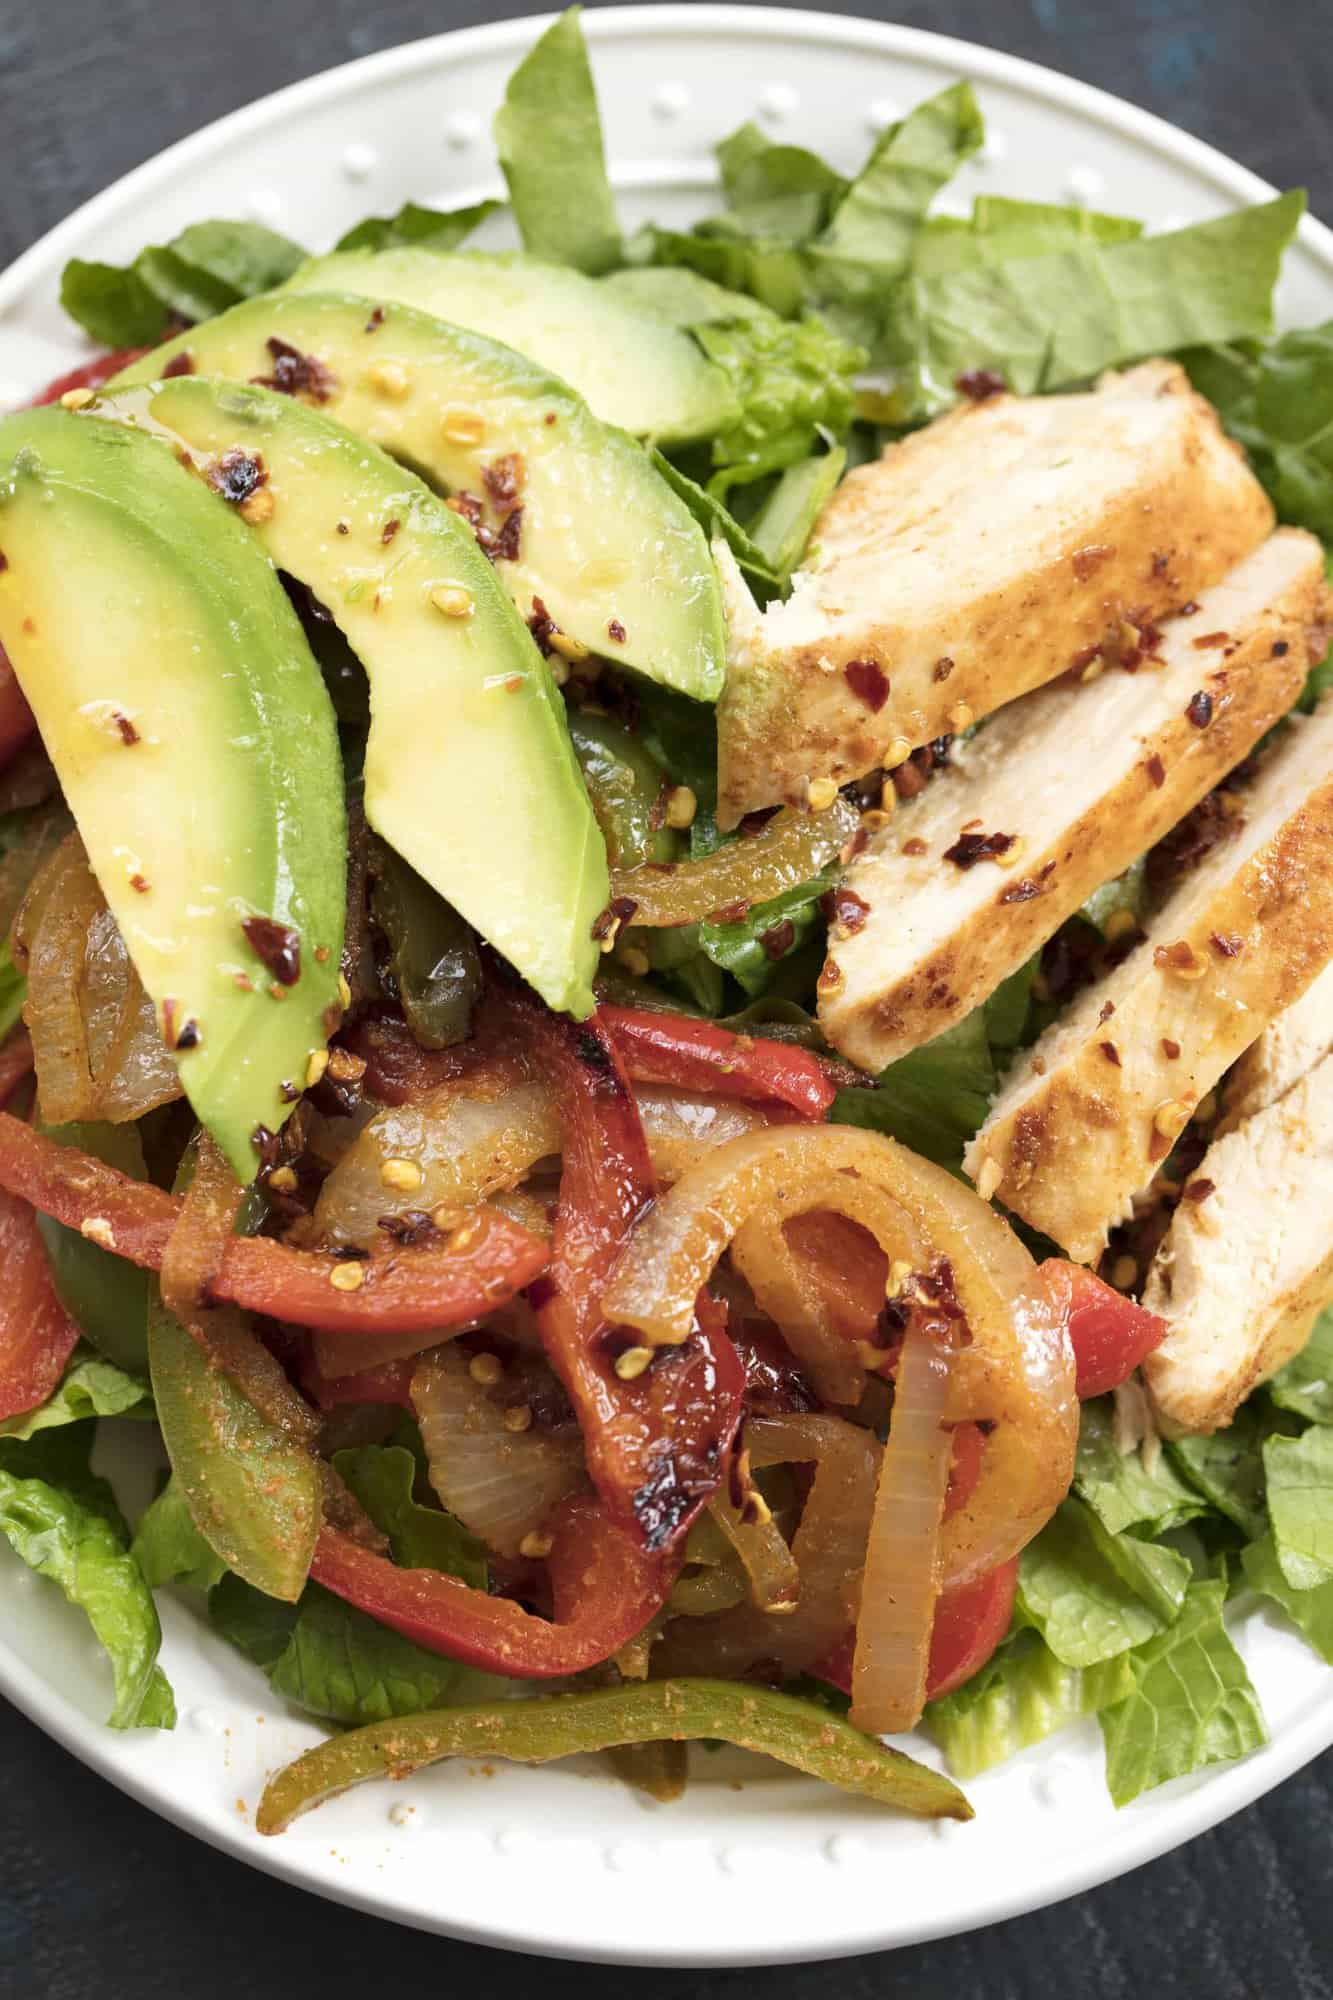 Skinny Chicken Fajita Salad is a recipe you'll use over and over again. This salad is ready in under 15 minute making it the perfect quick healthy lunch or dinner option.